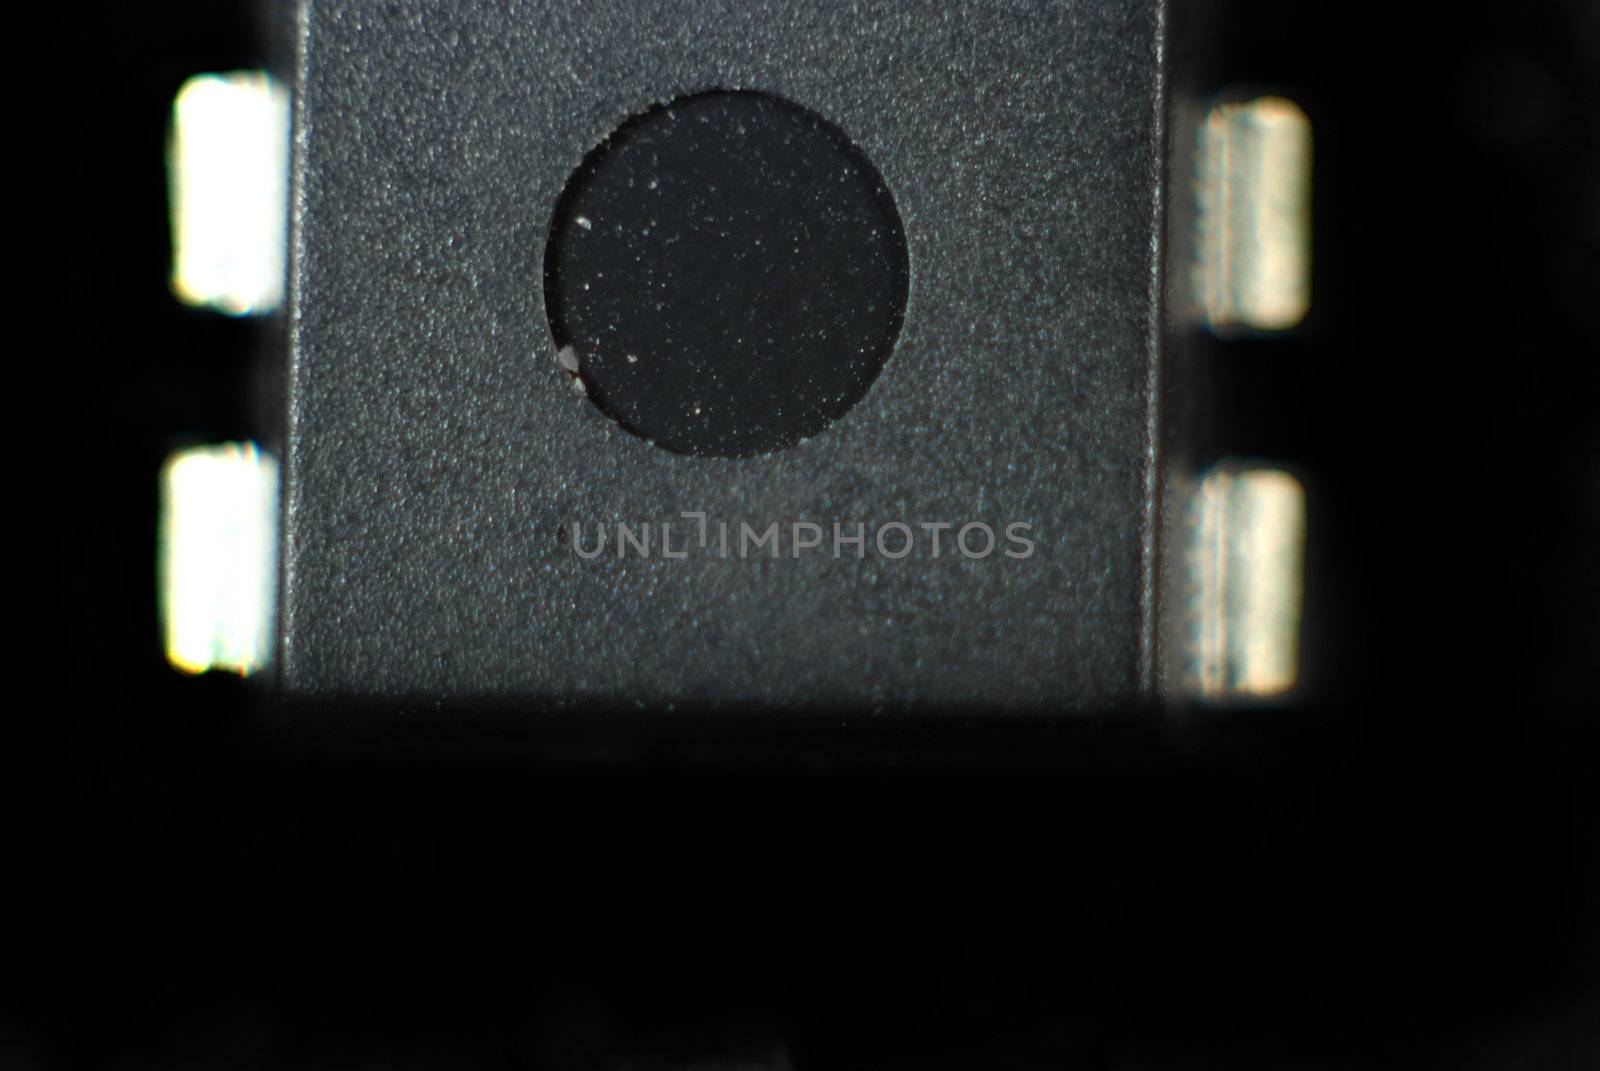 Stock pictures of computer and electronic chips